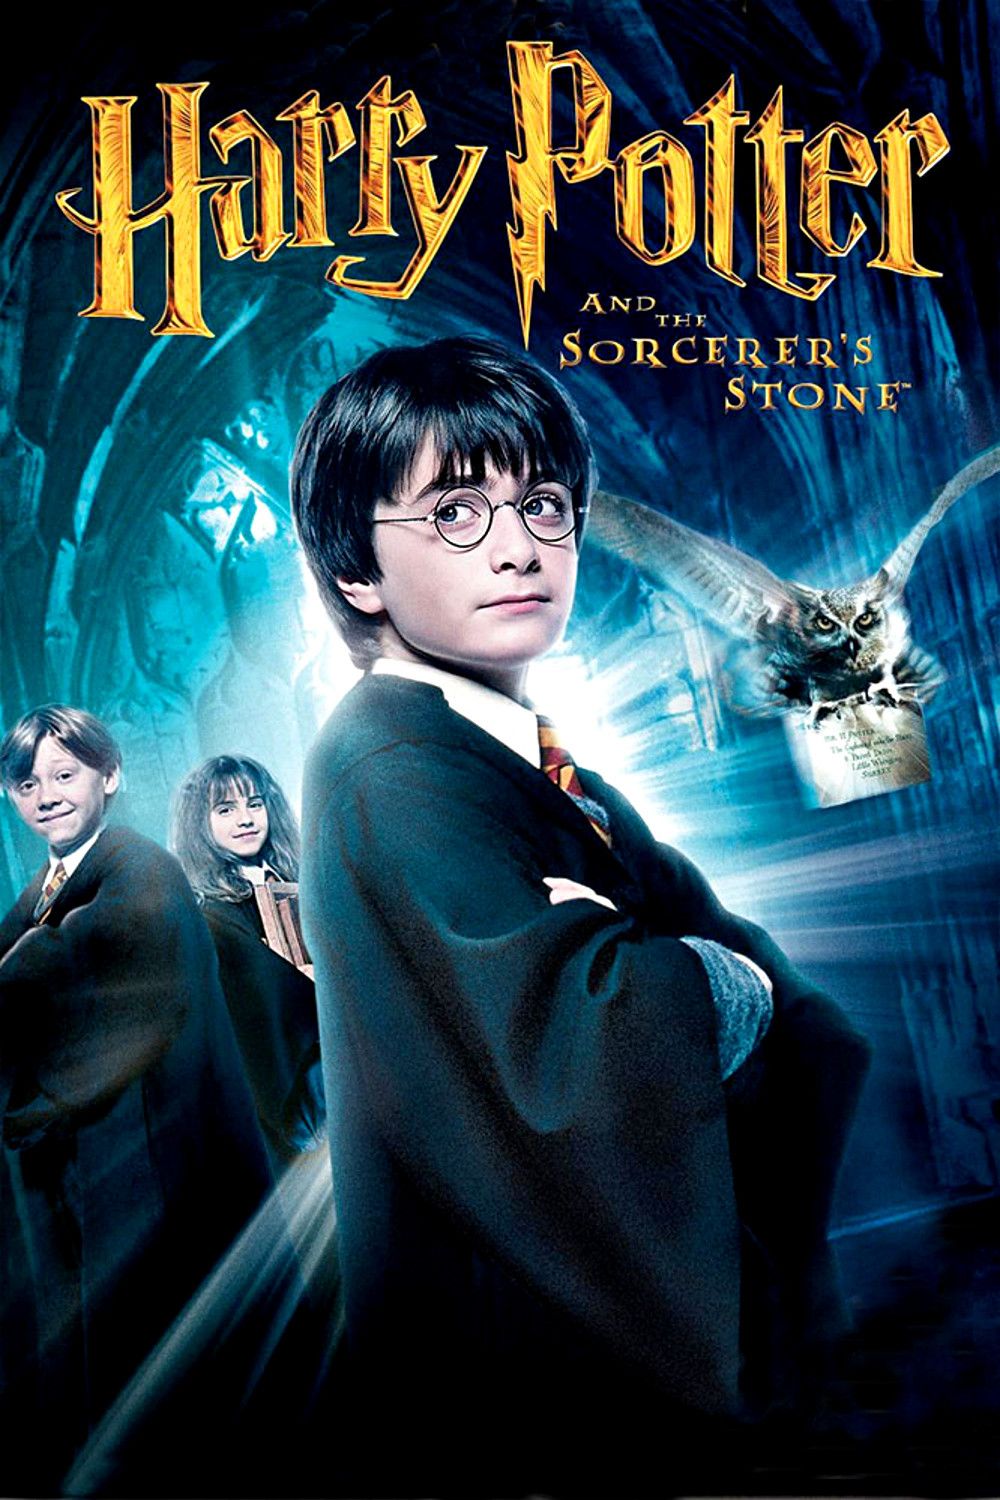 Harry Potter And The Sorcerers Stone Where To Watch Online Streaming Full Movie